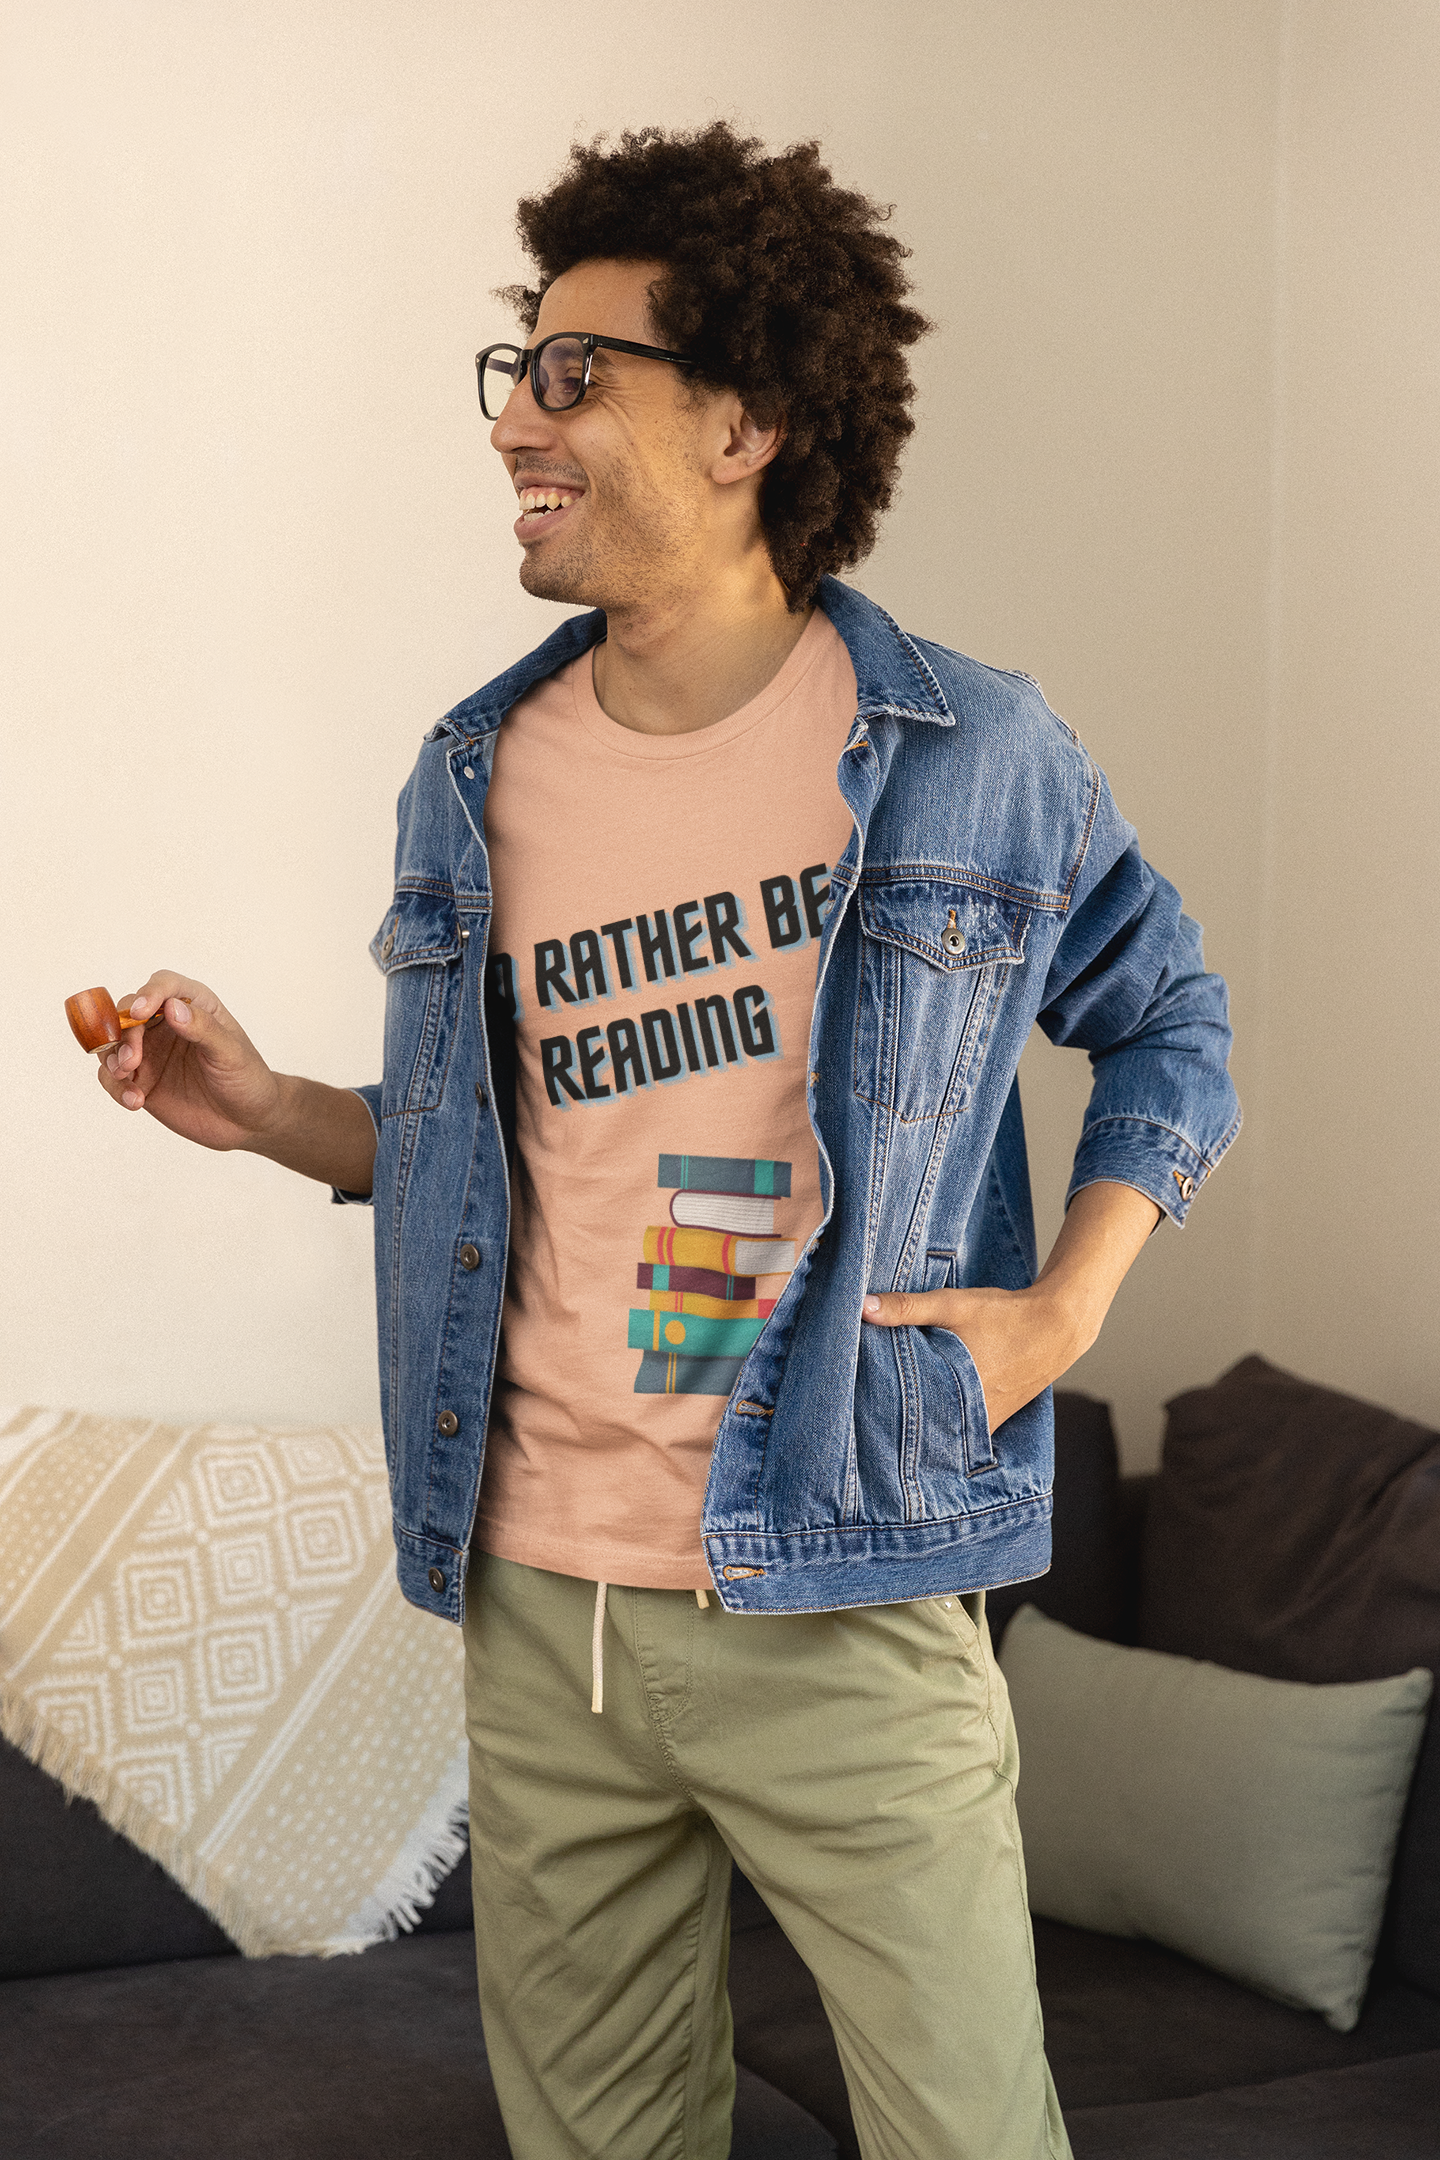 I'd Rather Be Reading Unisex Jersey Short Sleeve Tee